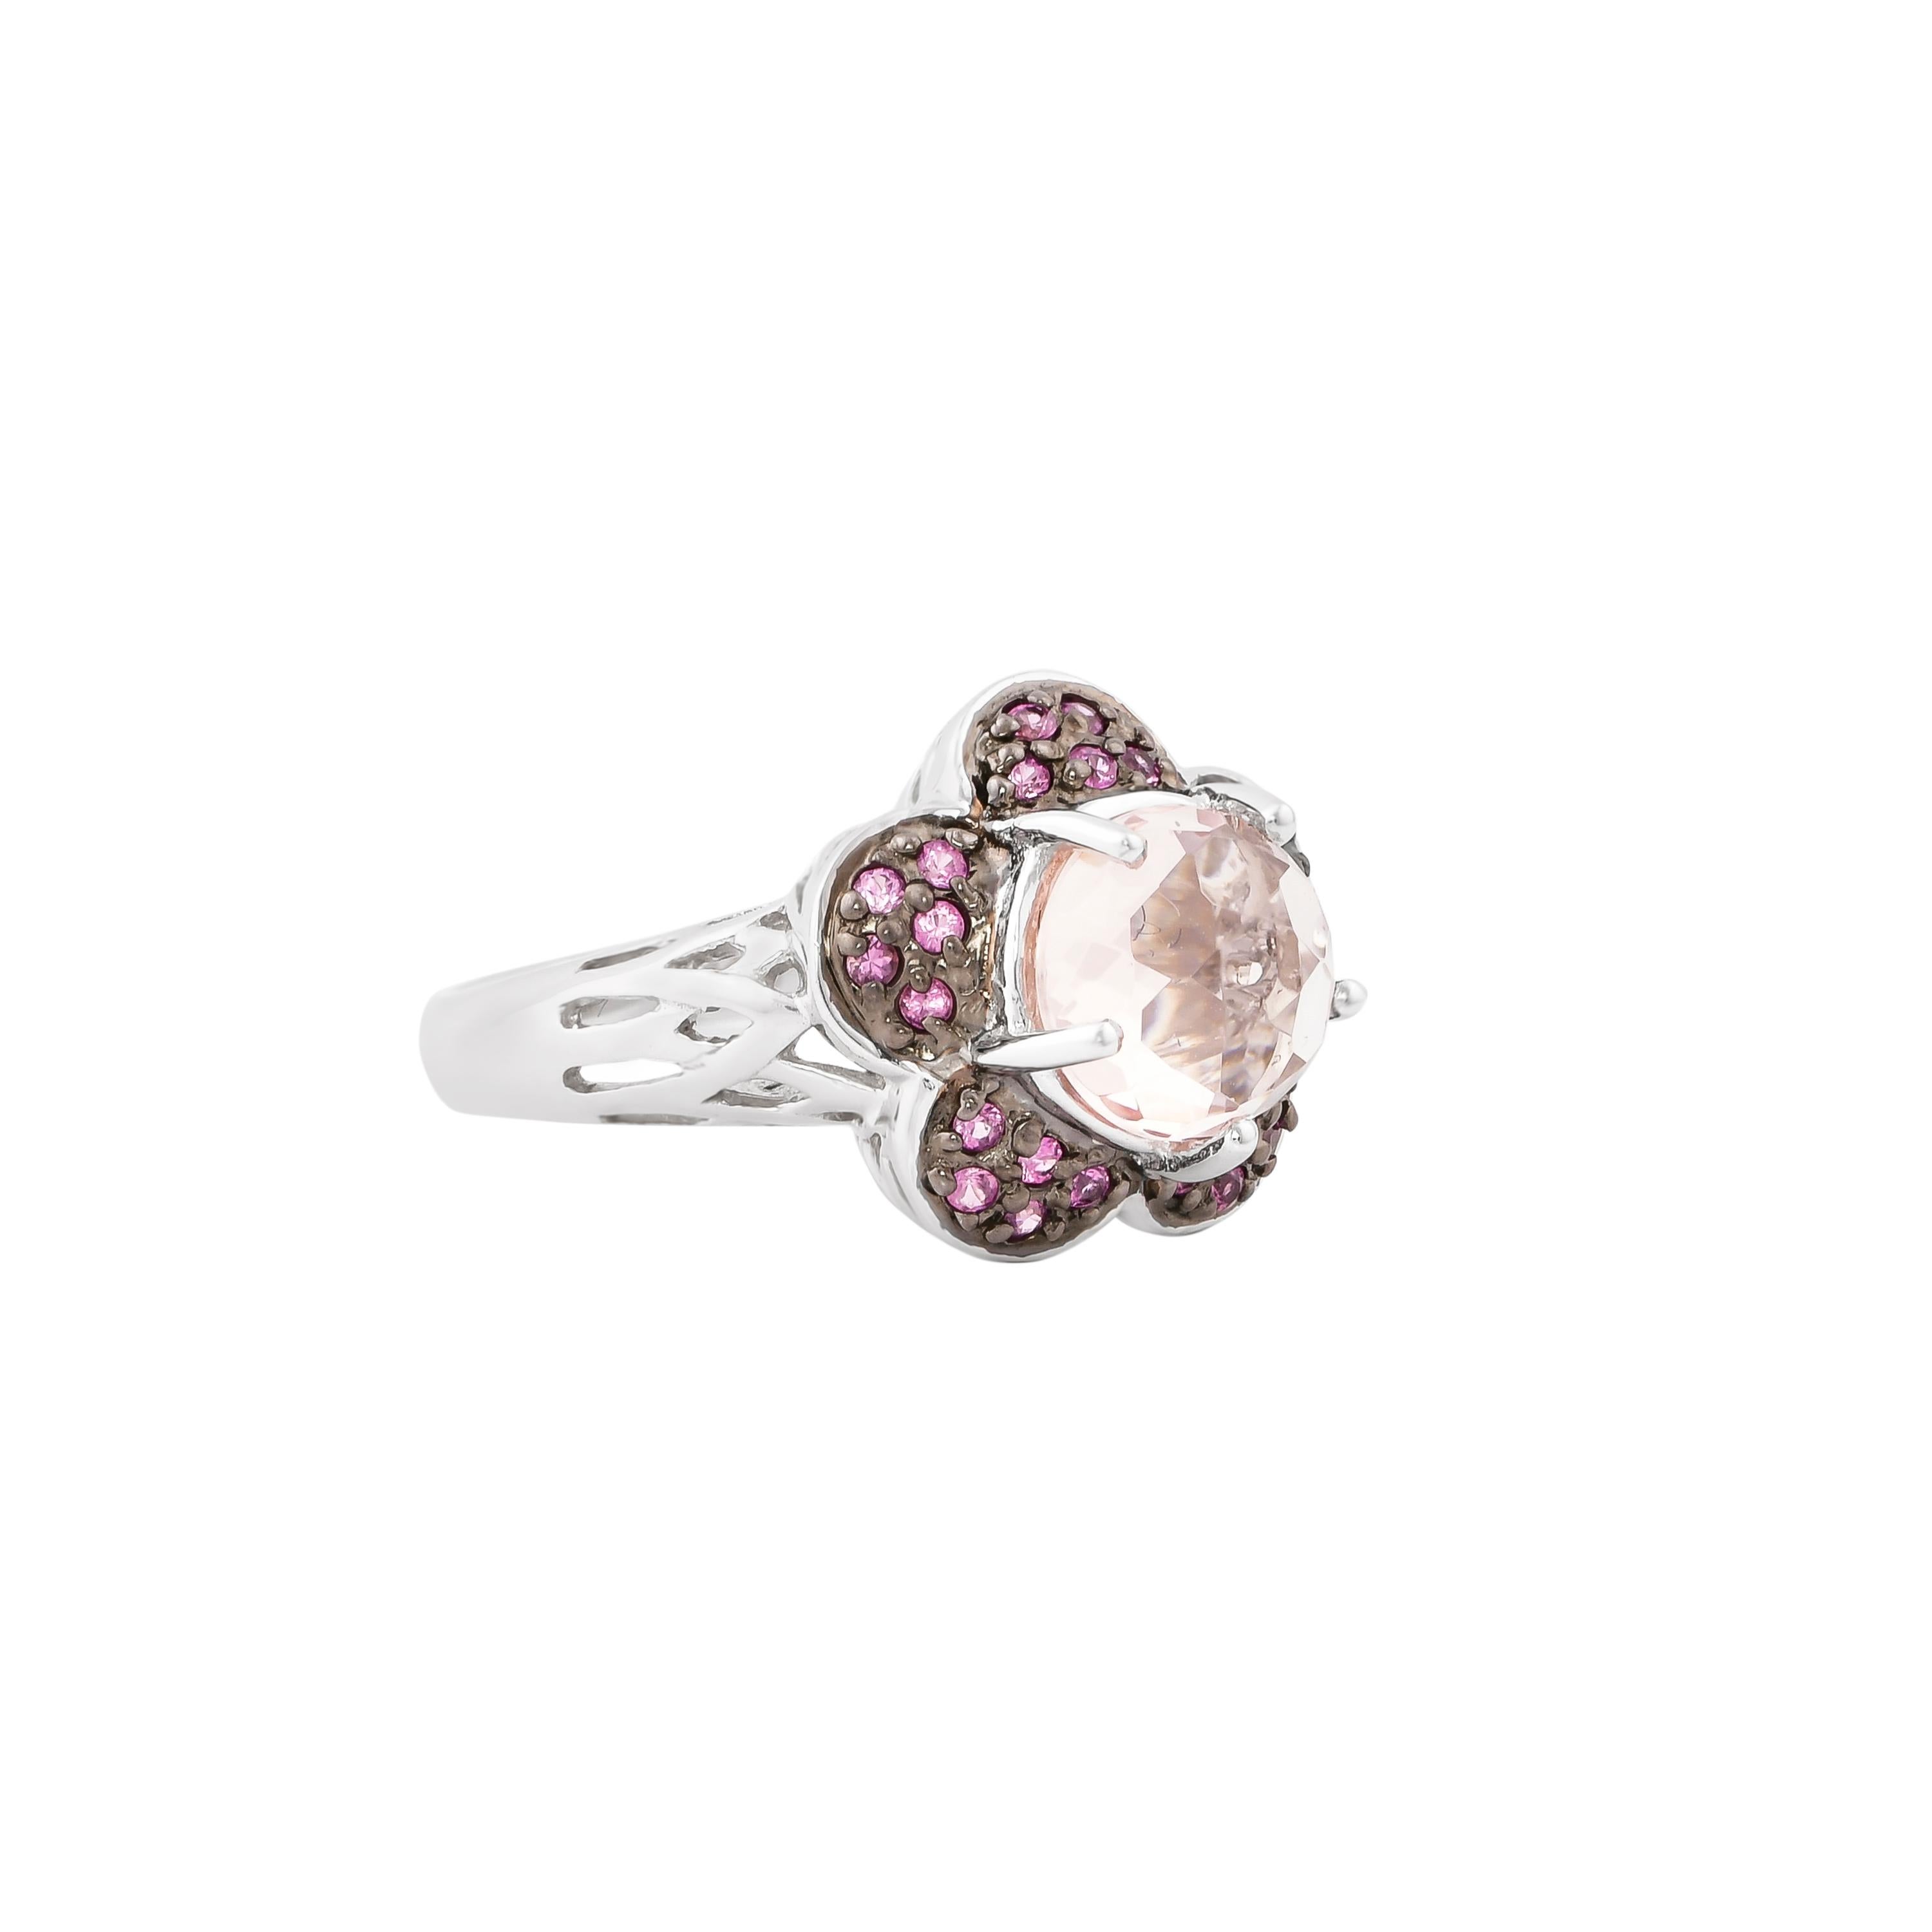 Glamorous Gemstones - Sunita Nahata started off her career as a gemstone trader, and this particular collection reflects her love for multi-colored semi-precious gemstones. This ring presents a radiant rhodolite center accented with pave rhodolites